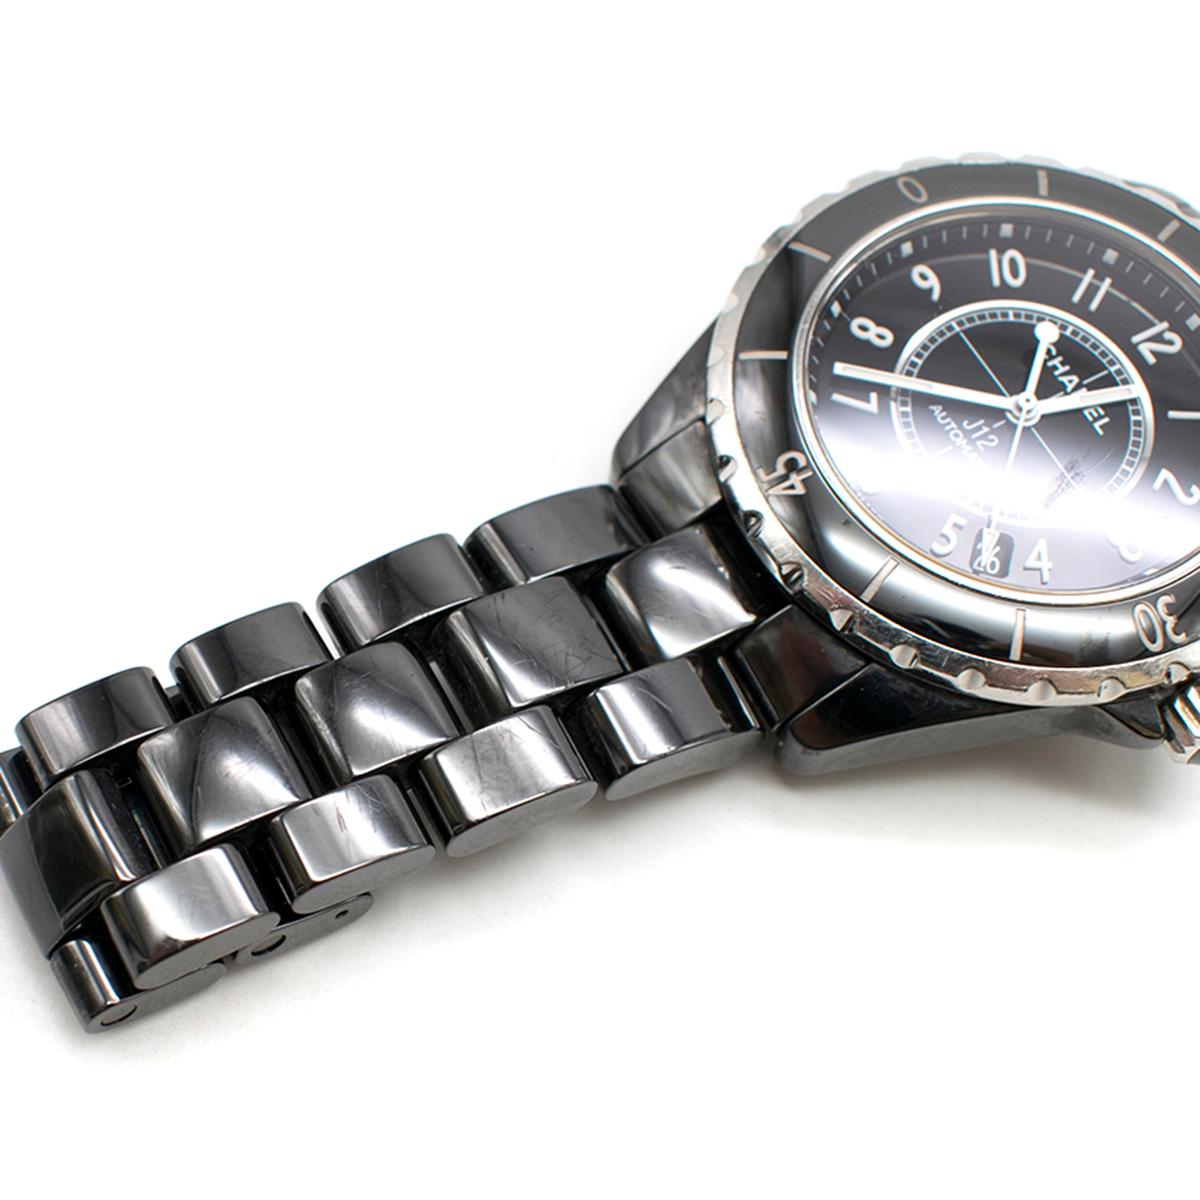 Chanel Black and Silver J12 Automatic Watch 5